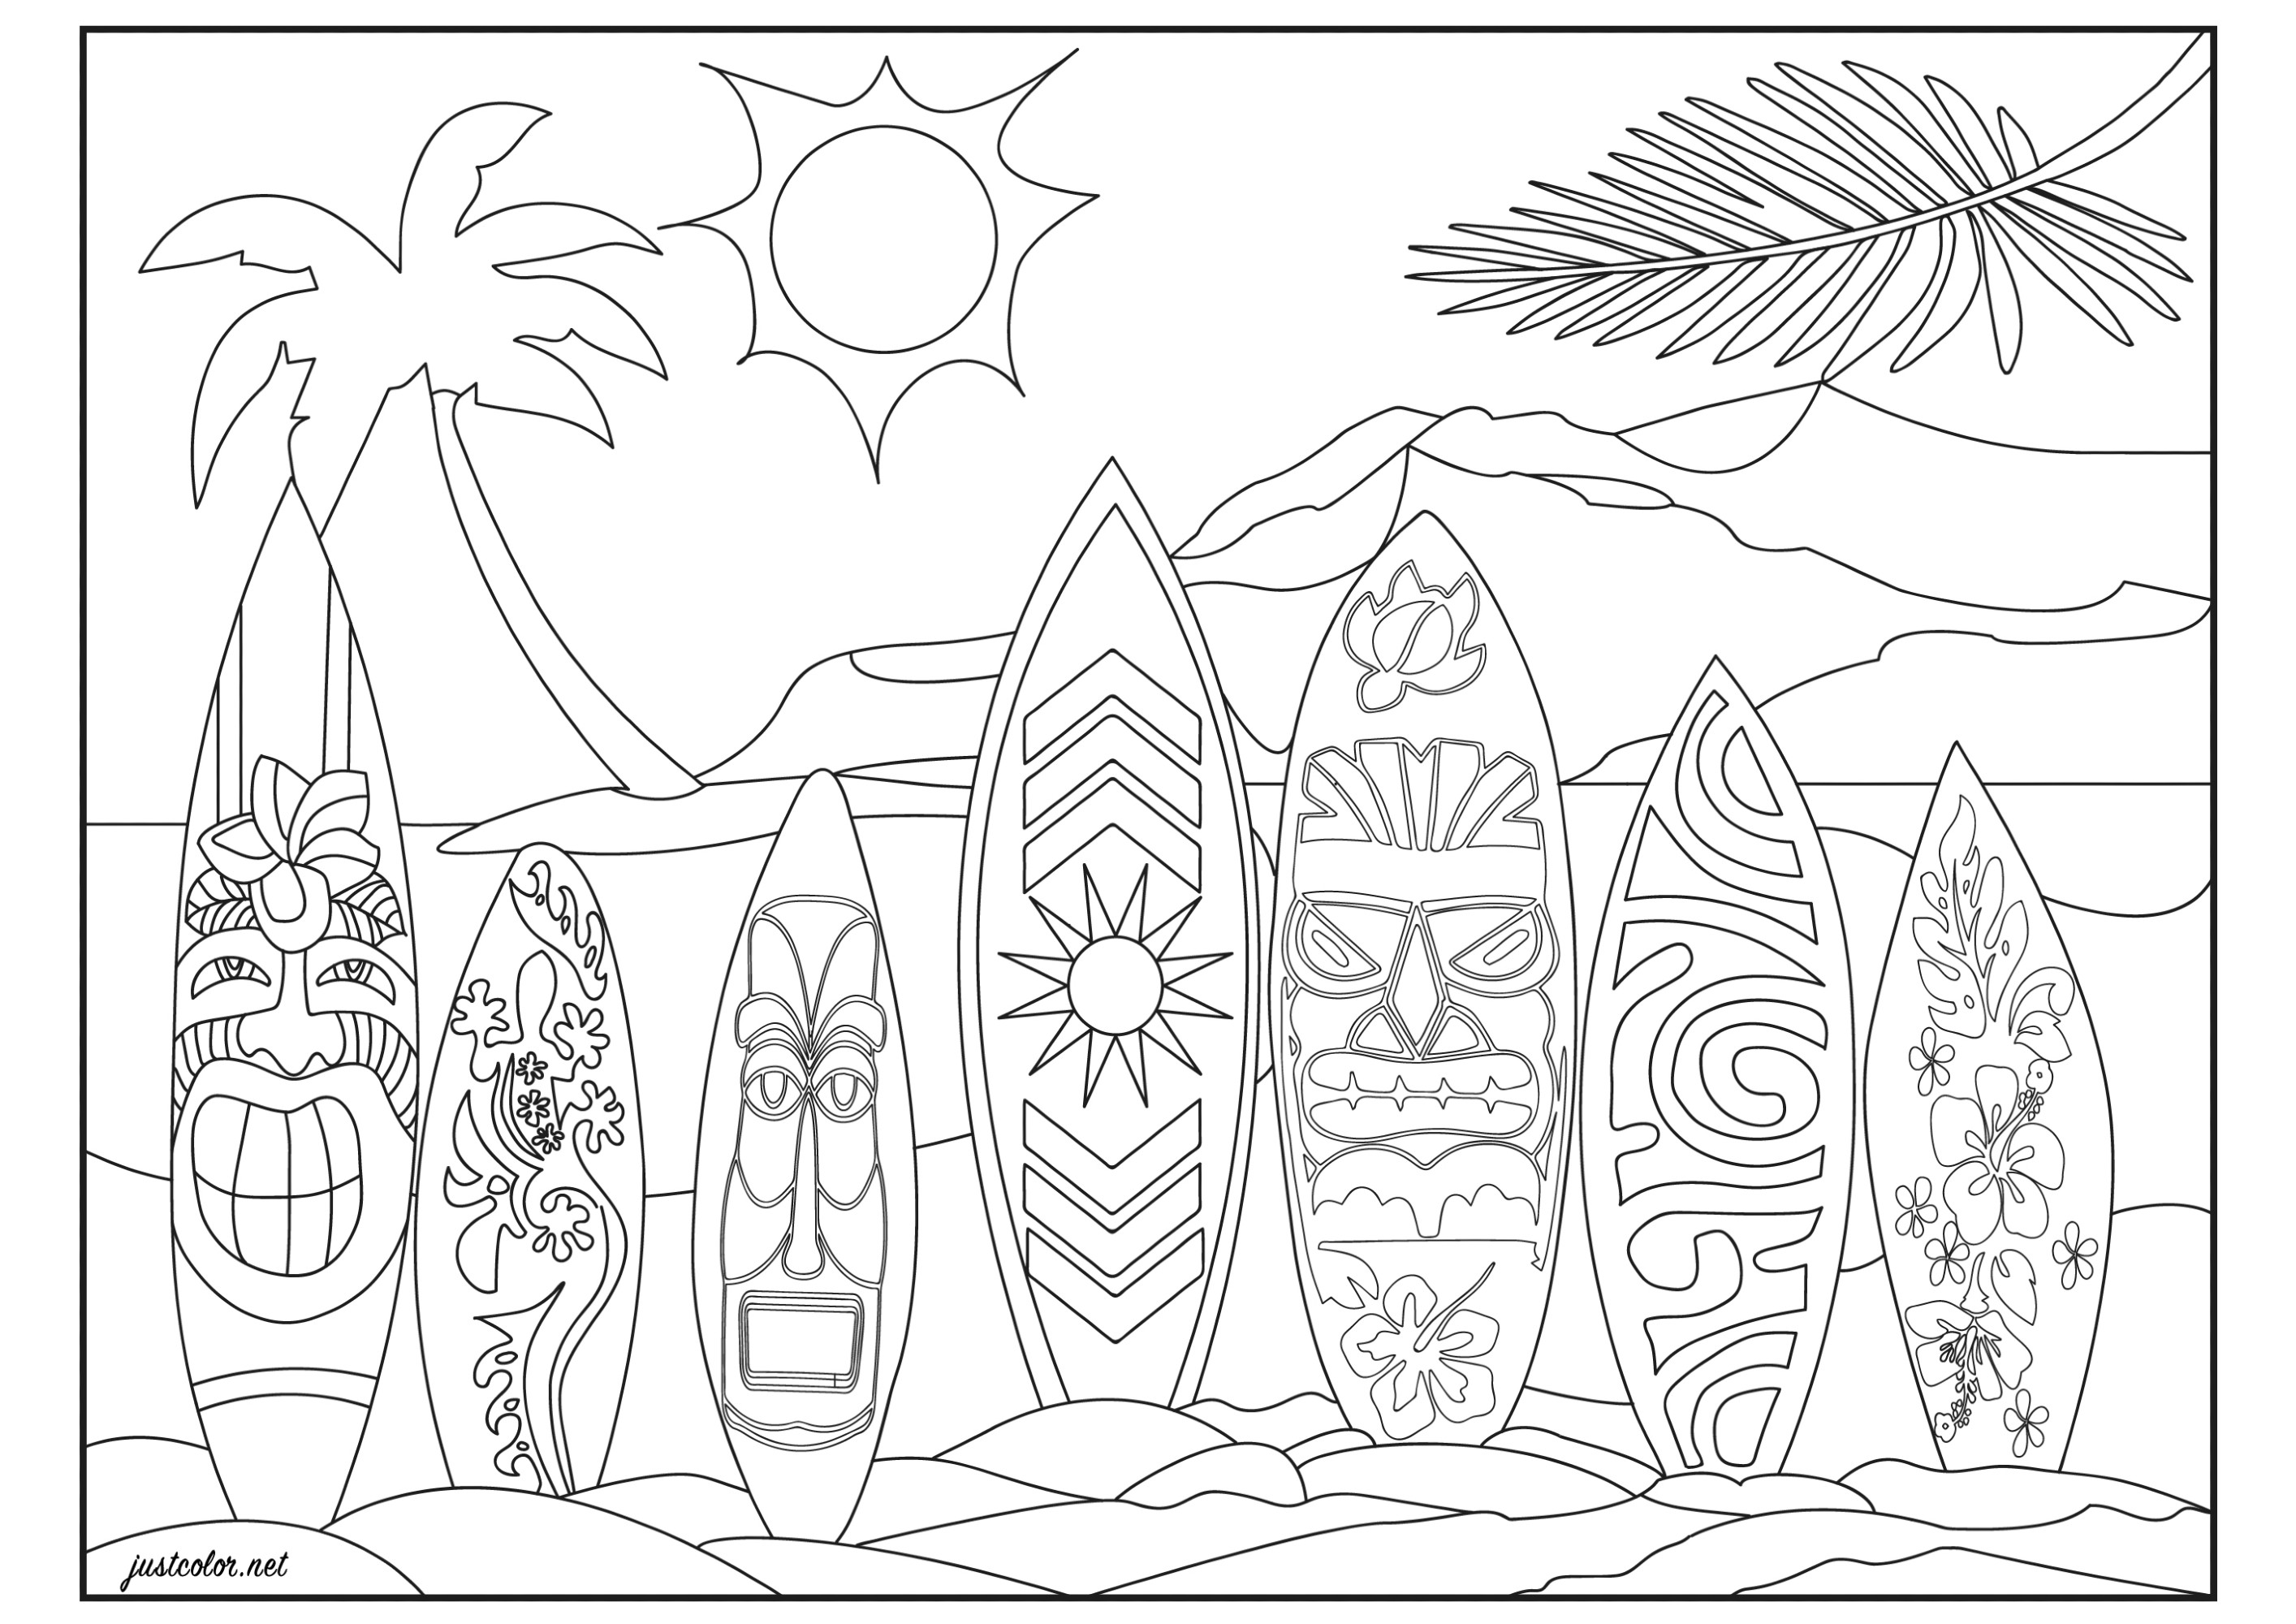 On a beach in Honolulu (Hawaii, Pacific). Alignment of surfboards with tribal Hawaiian, Maori, vintage and floral motifs (tropical hibiscus flowers)Ready to surf the perfect wave?Original coloring with a volcanic mountain and coconut tree in the background, Artist : Morgan